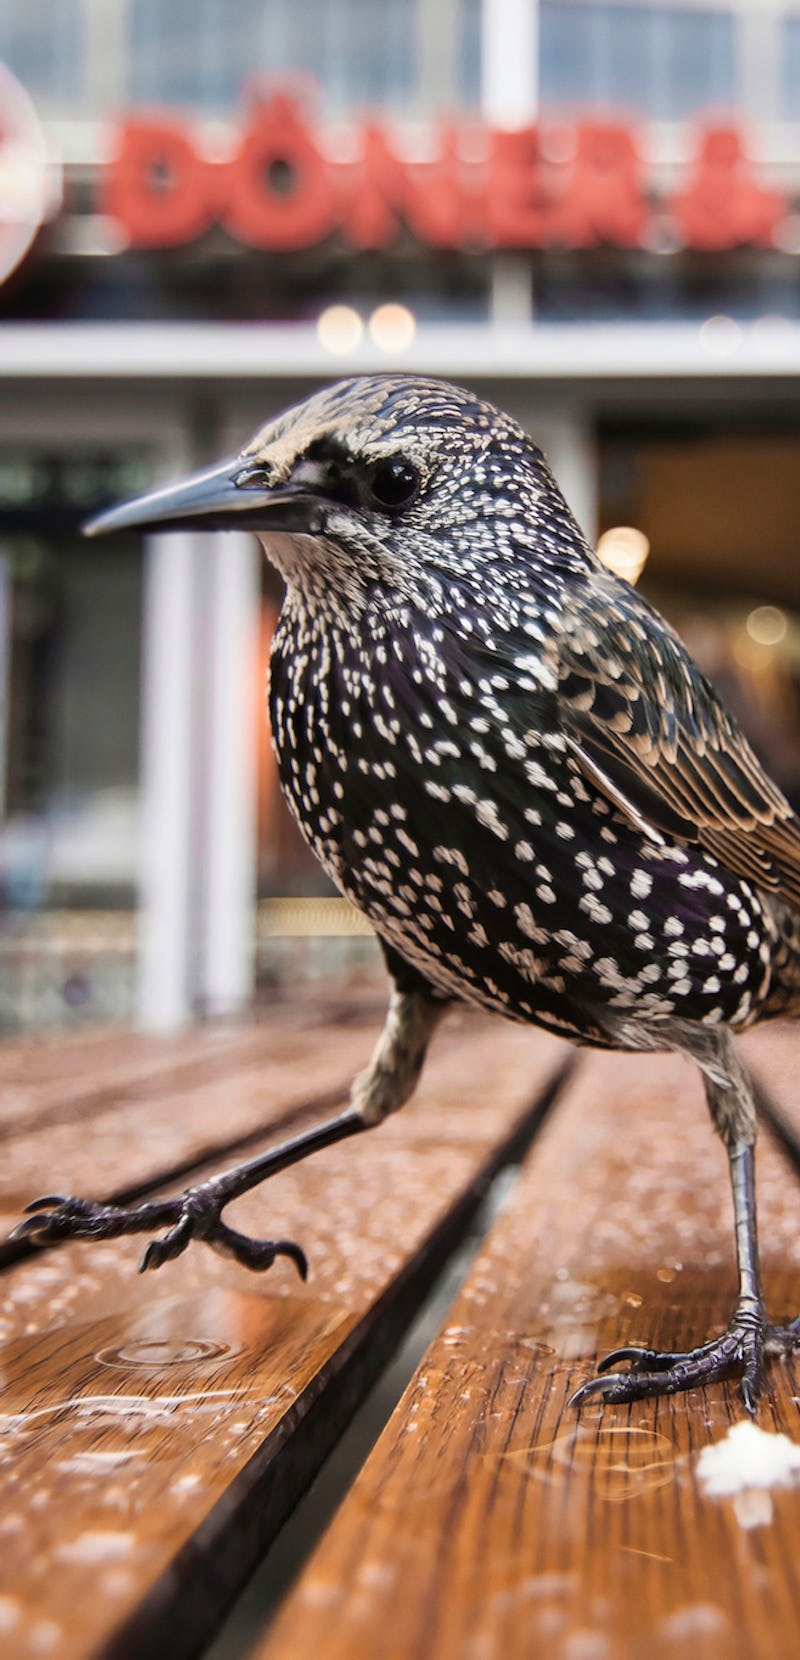 Two starling birds on a table outside of a restaurant, foraging for scraps